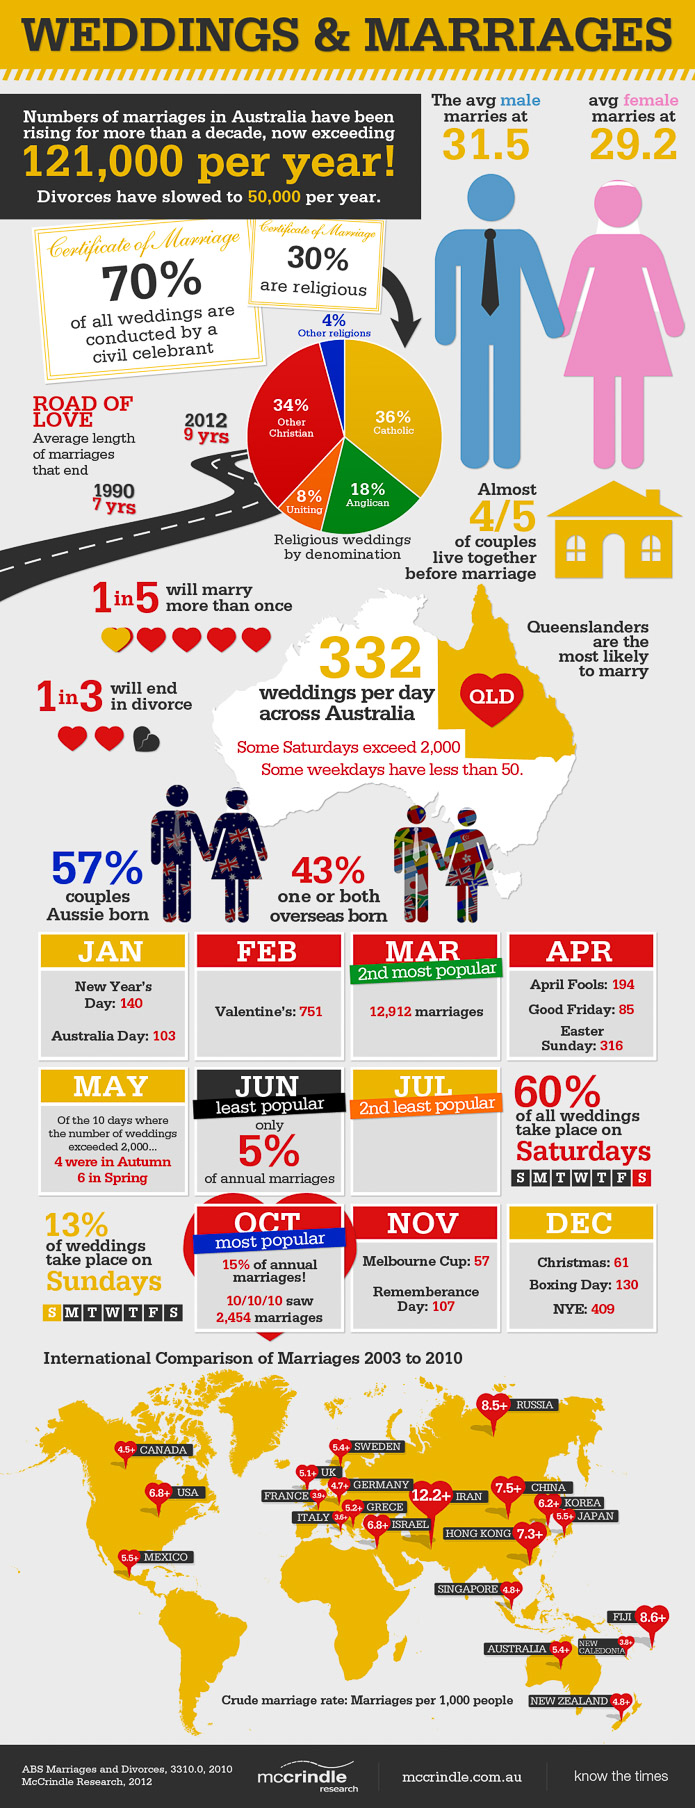 Weddings and Marriages Infographic McCrindle Research 2012